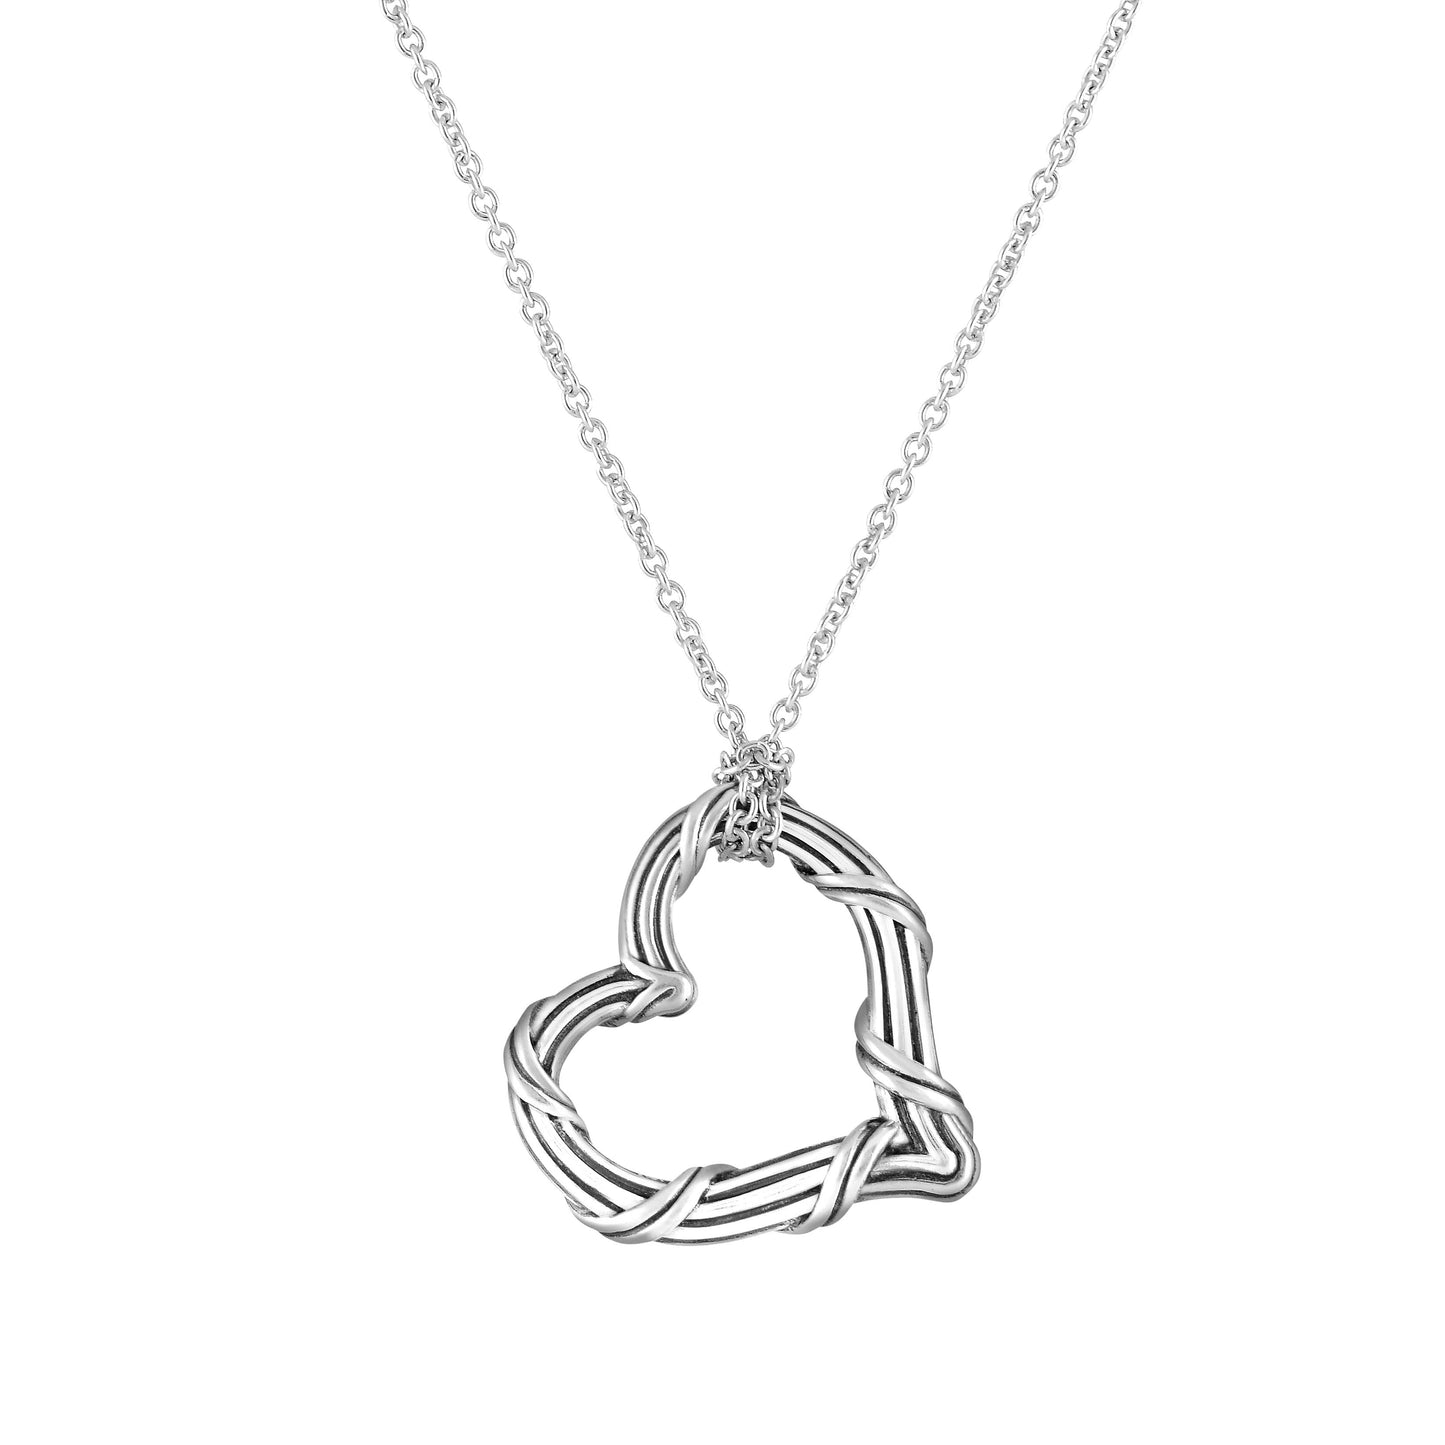 Signature Classic Medium Heart Necklace in sterling silver